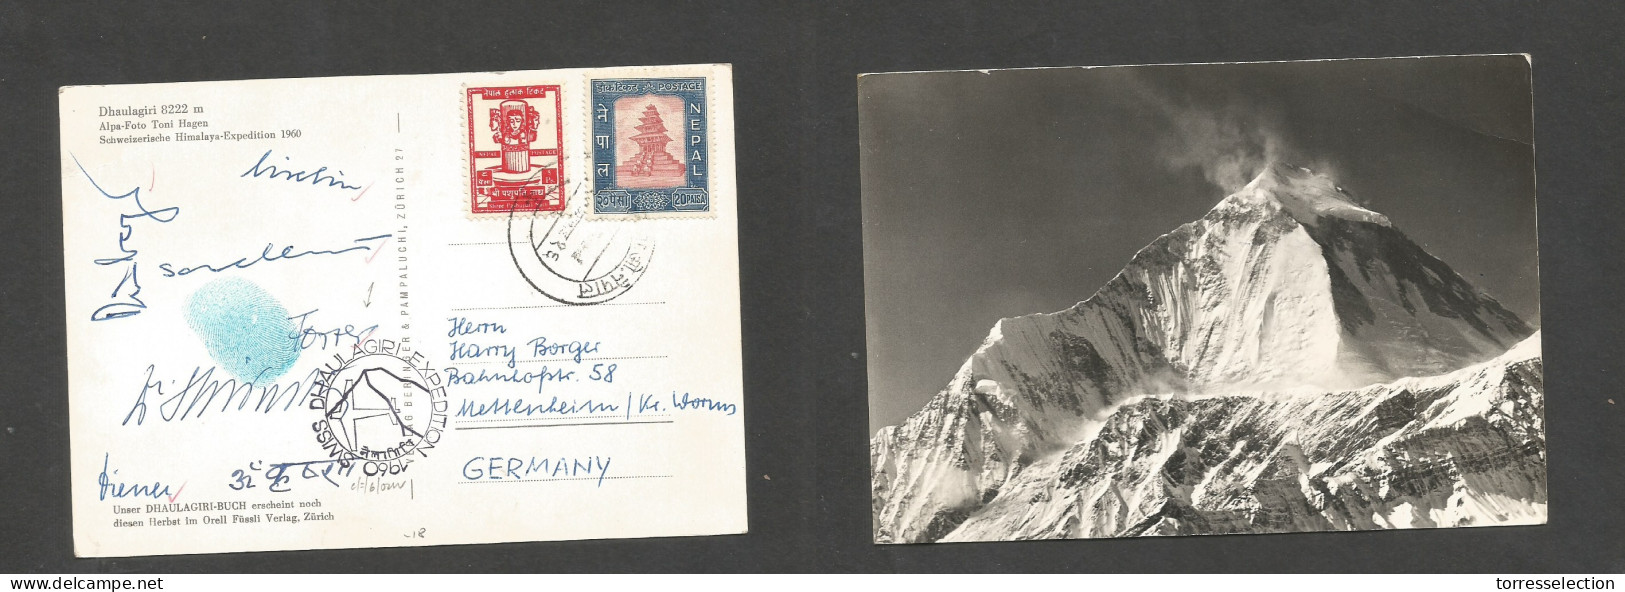 NEPAL. 1960. Commemorative Rise To Himalaya. Signed By 6 Members, One Only His Finger Print (local) Dhaulagini Expeditio - Népal